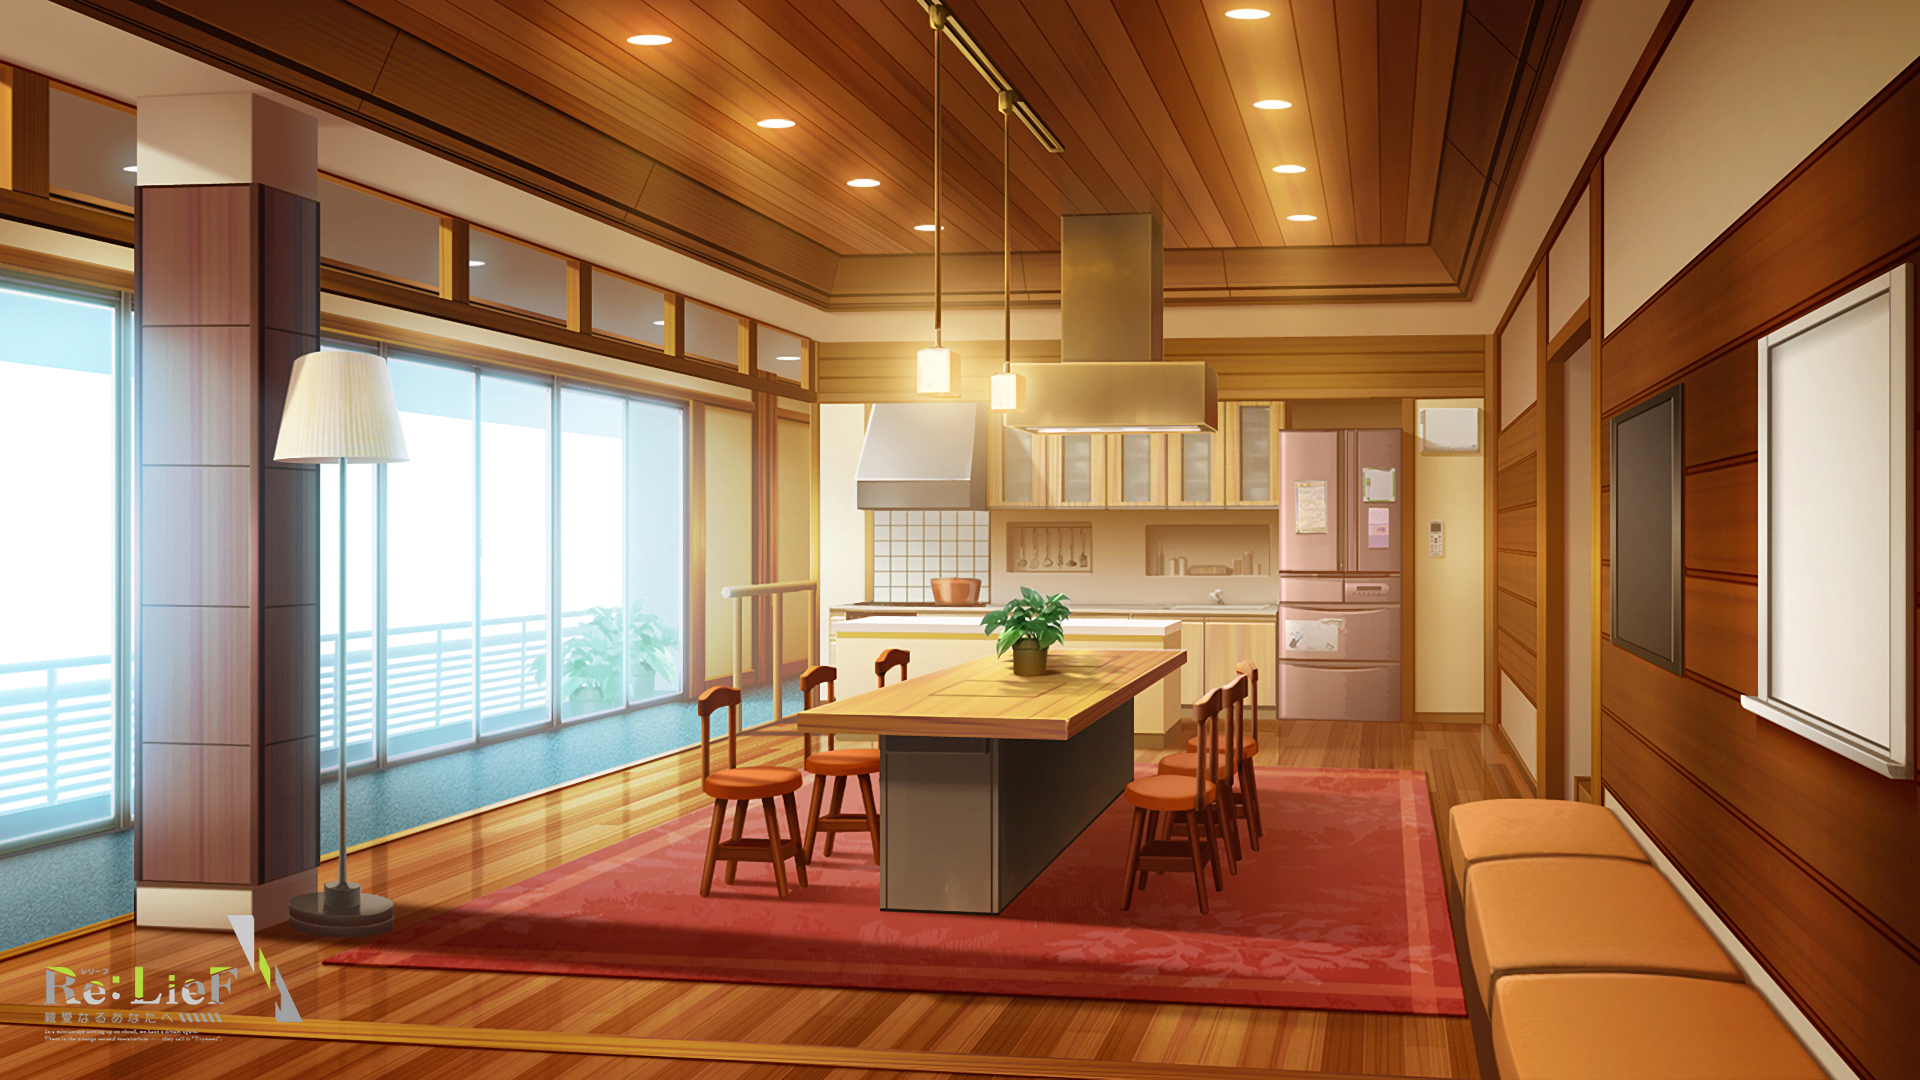 Inside The House Anime Wallpapers Wallpaper Cave Scene actress room night by denusb on deviantart. inside the house anime wallpapers